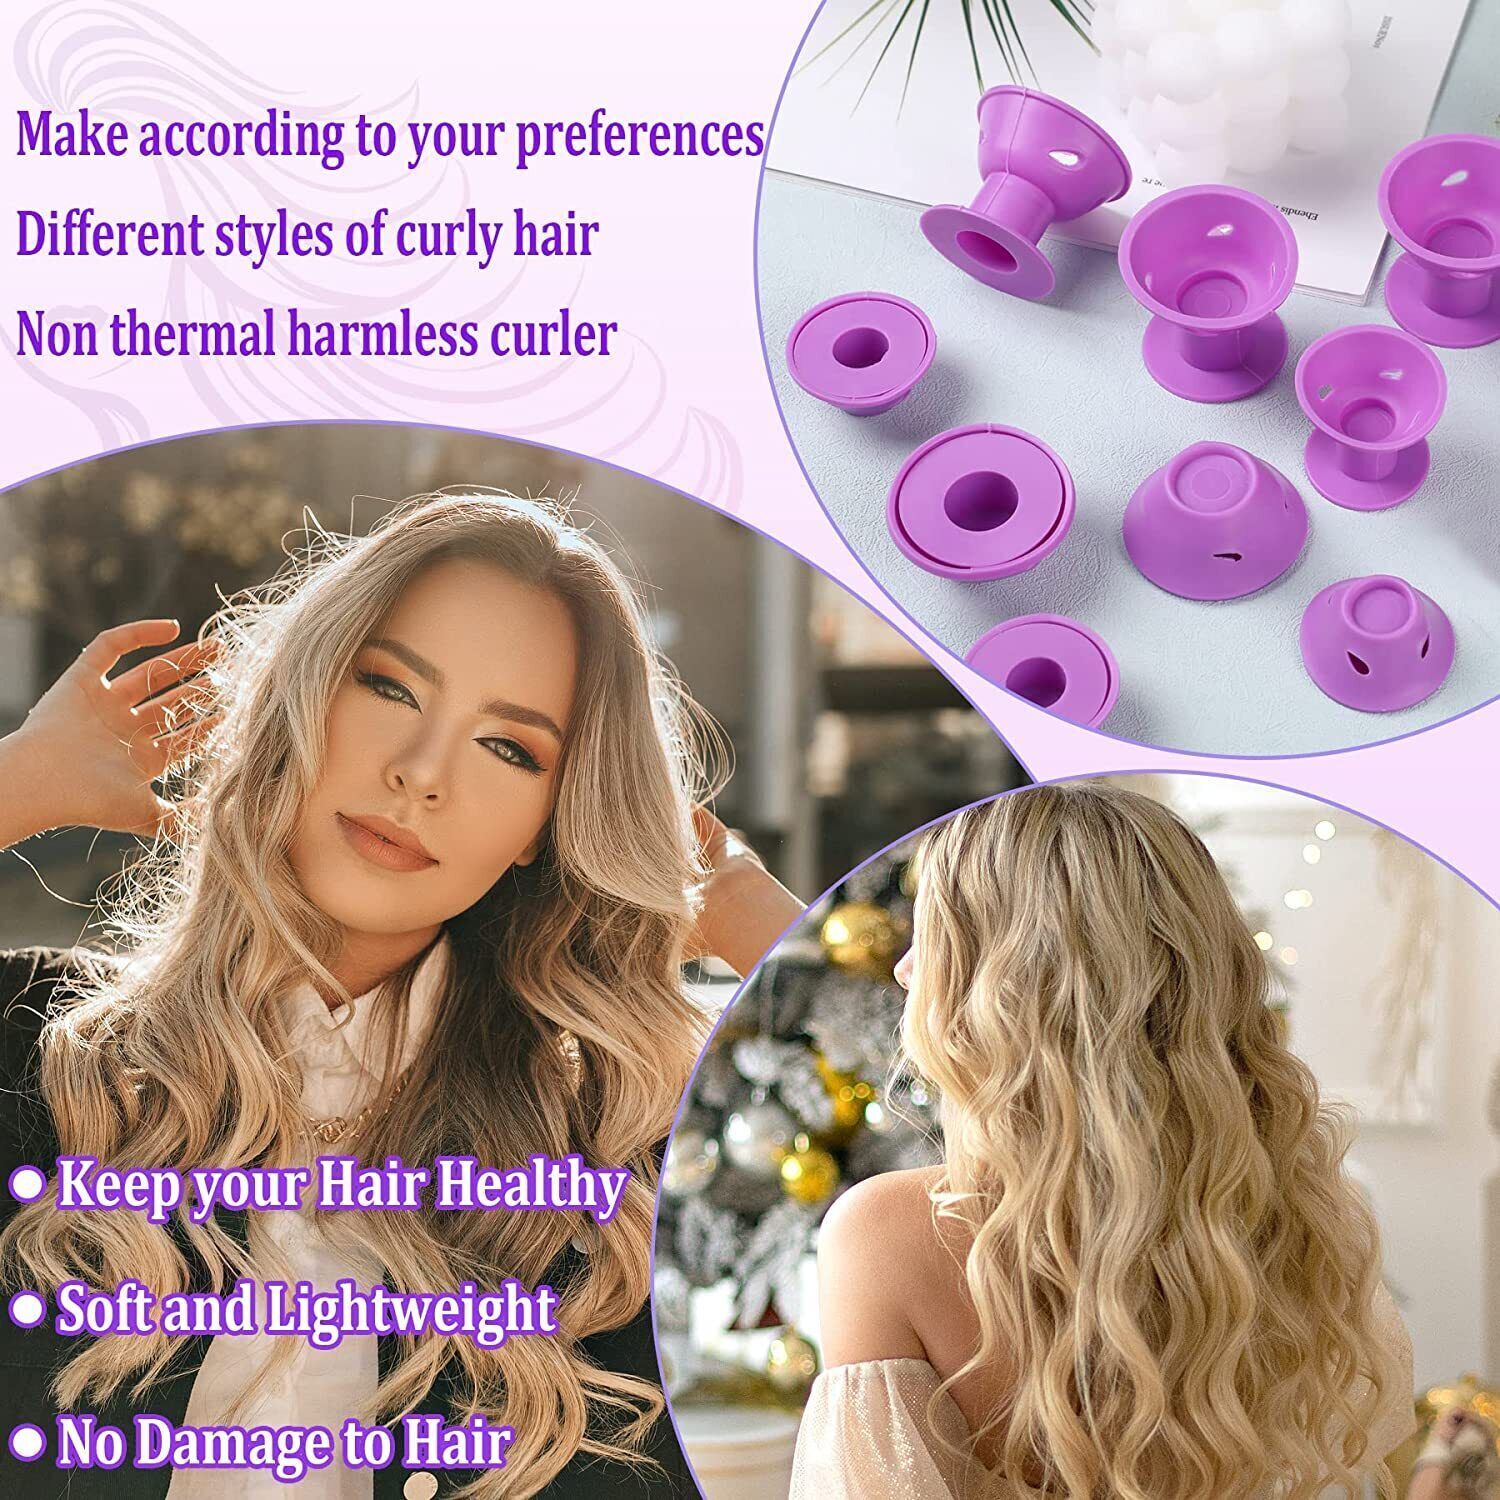 35 PCS Silicone No Heat Hair DIY Curlers Magic Soft Rollers Hair Care Tool Unbranded DOES NOT APPLY - фотография #8